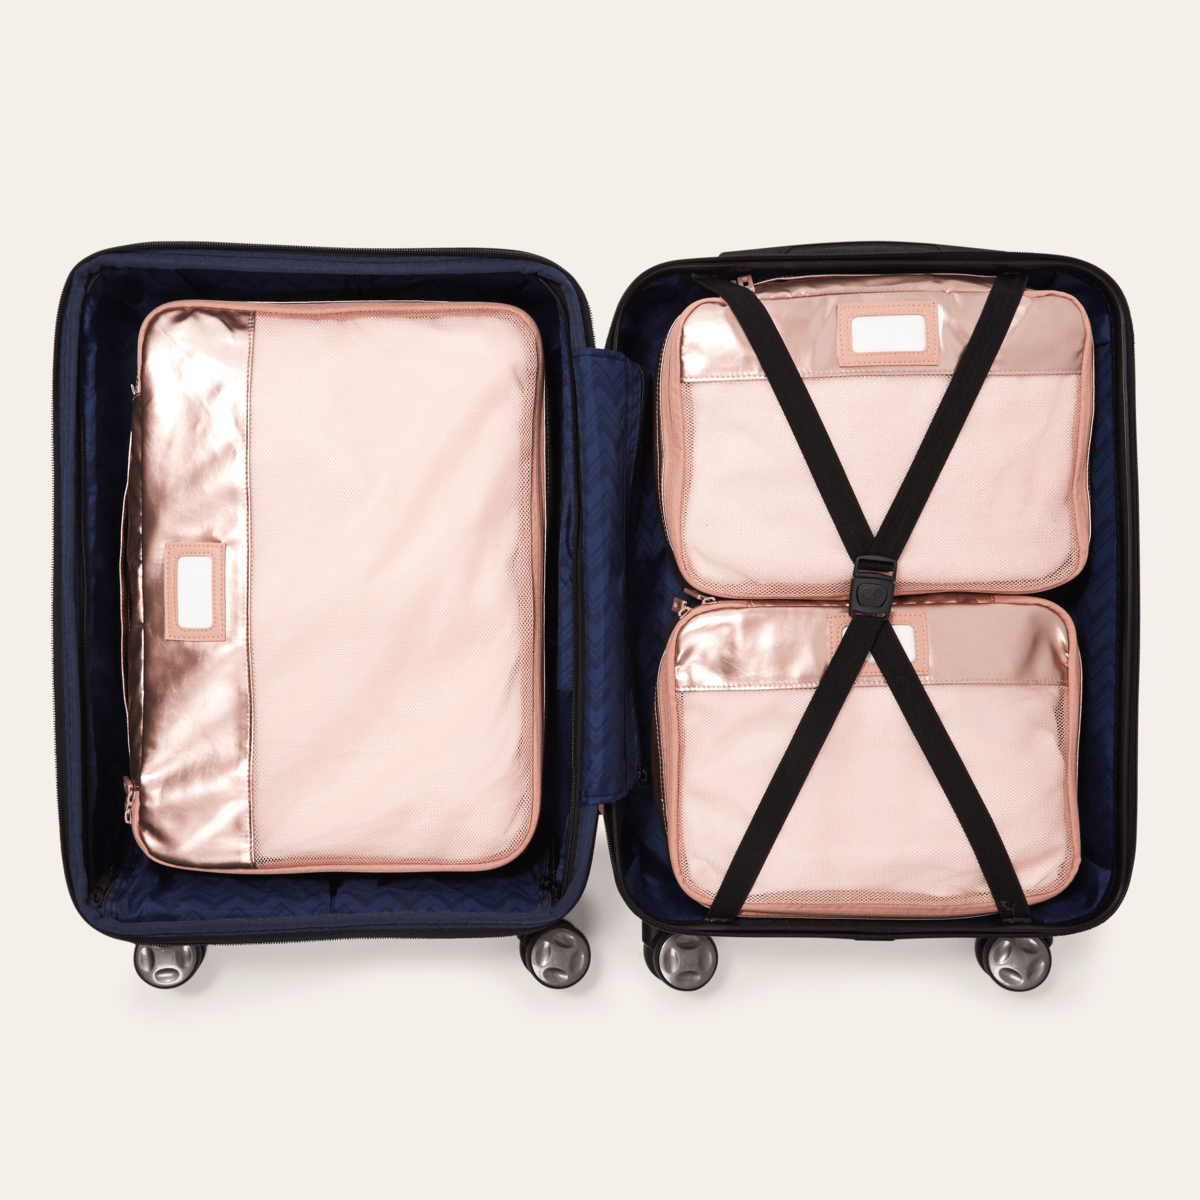 Flight Attendants reveal some travel essentials one should always fly with